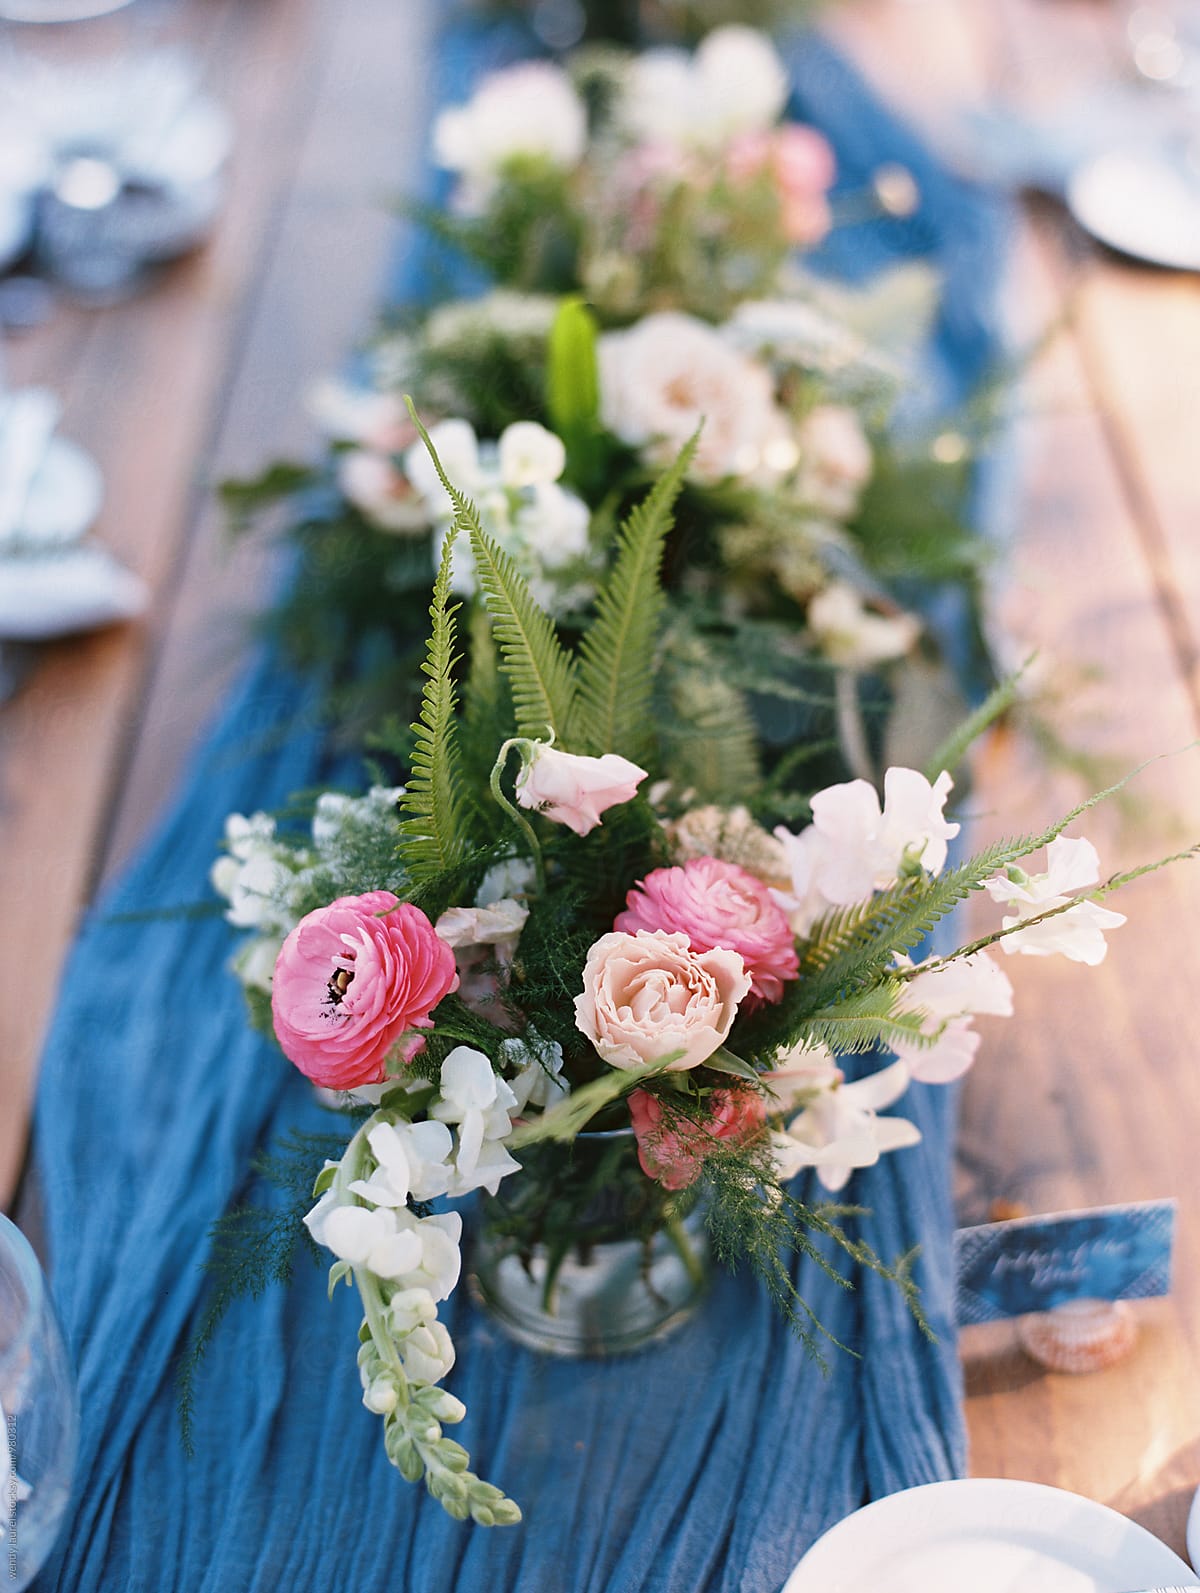 blue runner on table with pink floral centerpiece